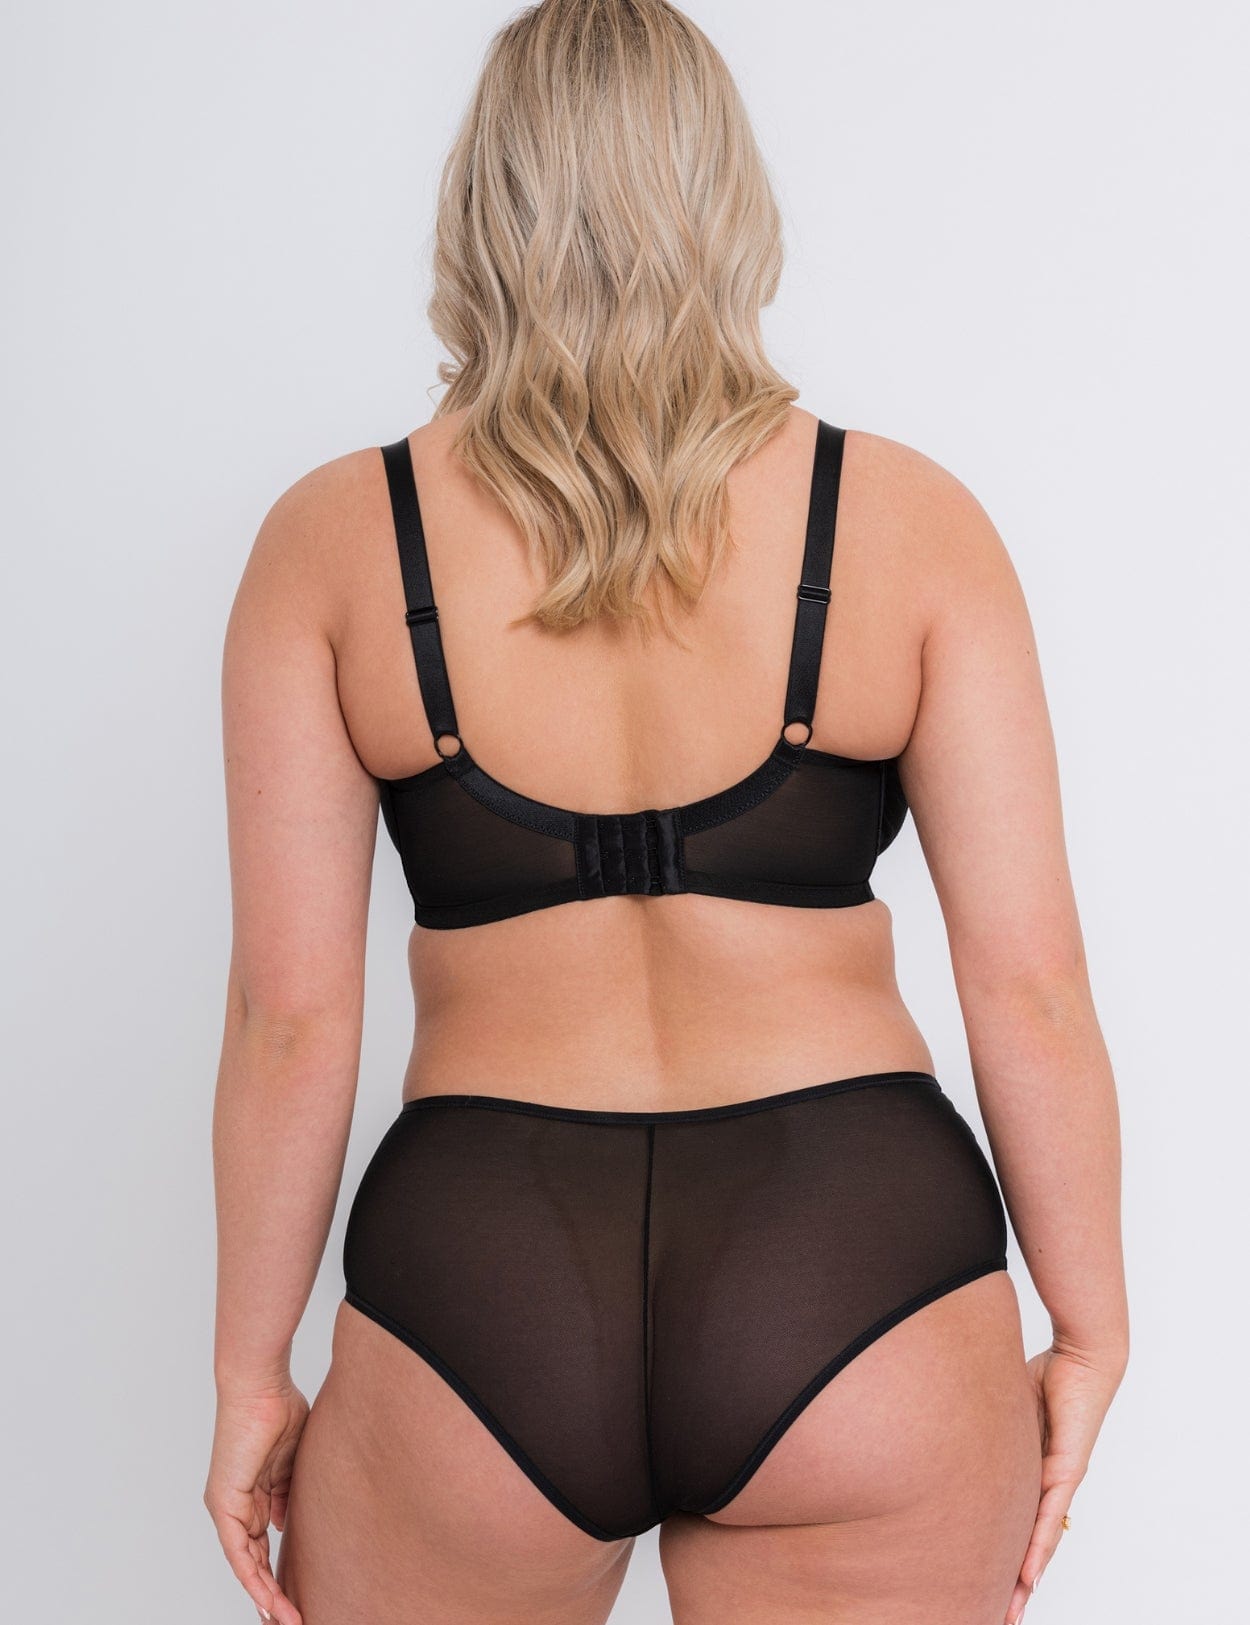 Curvy Kate - Curvy Kate babes down under! Shop are bestseller on